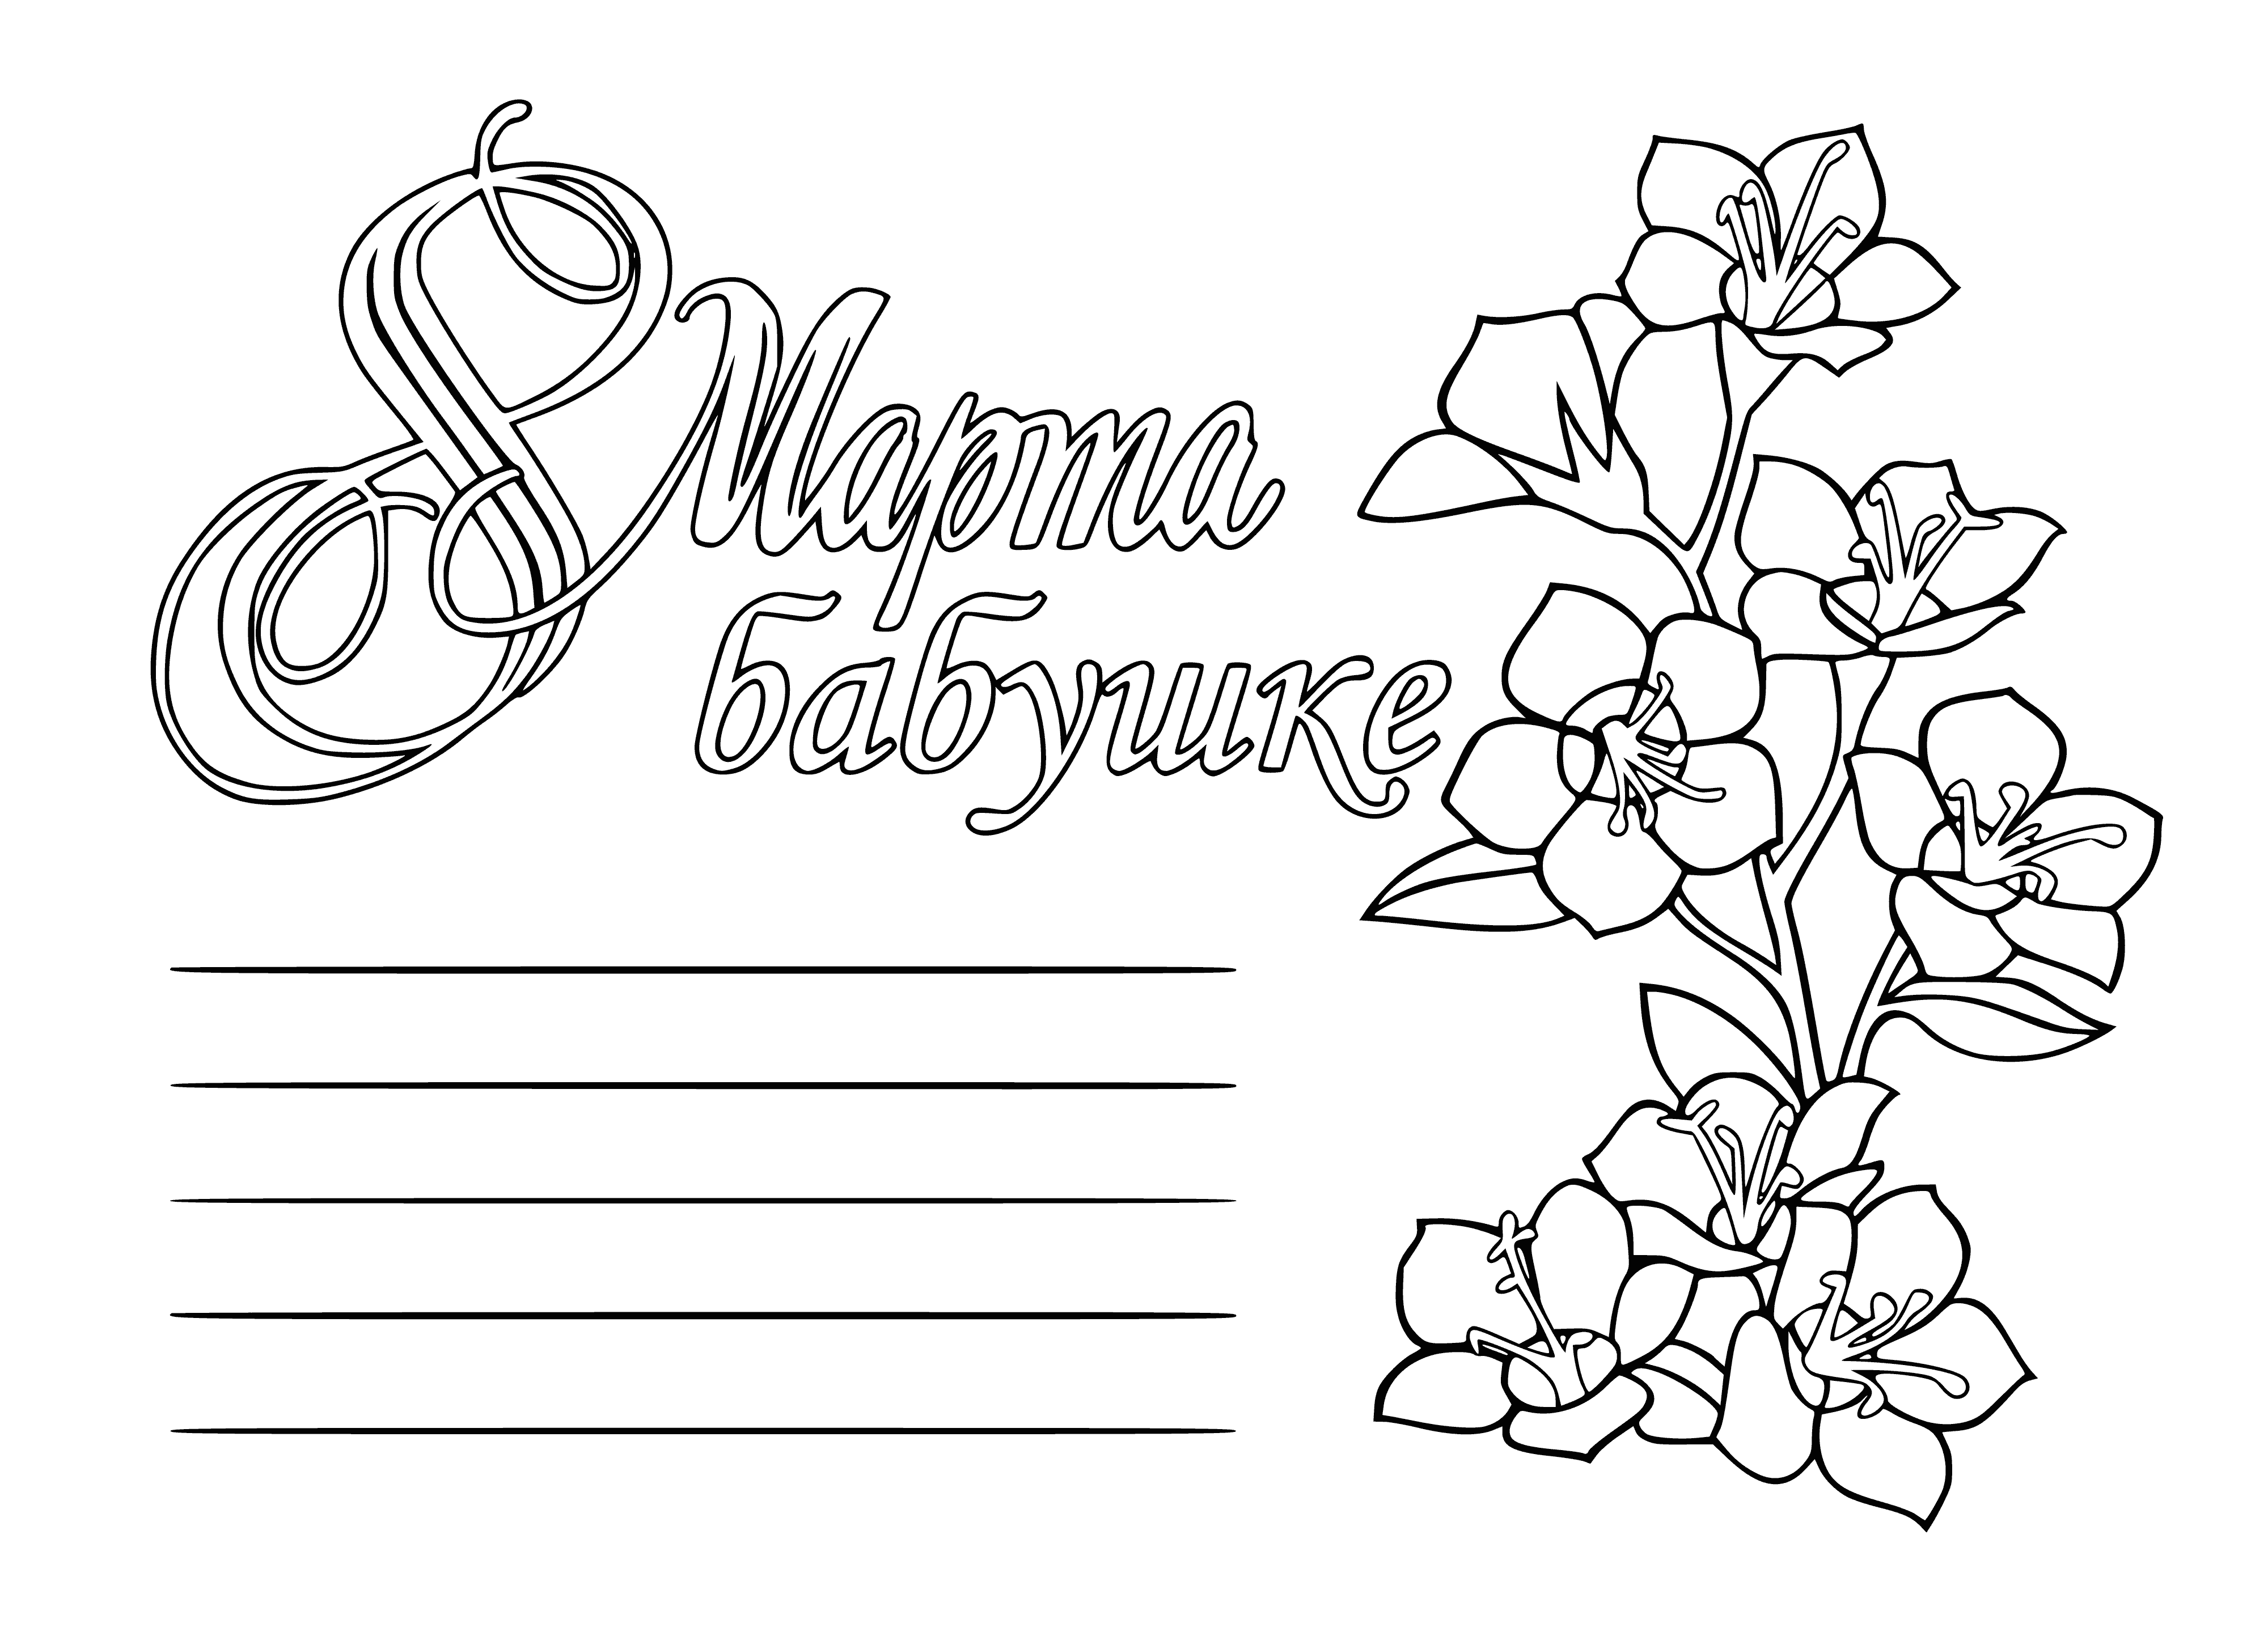 coloring page: Grandma enjoys tea and cake at her kitchen table, smiling at the camera.